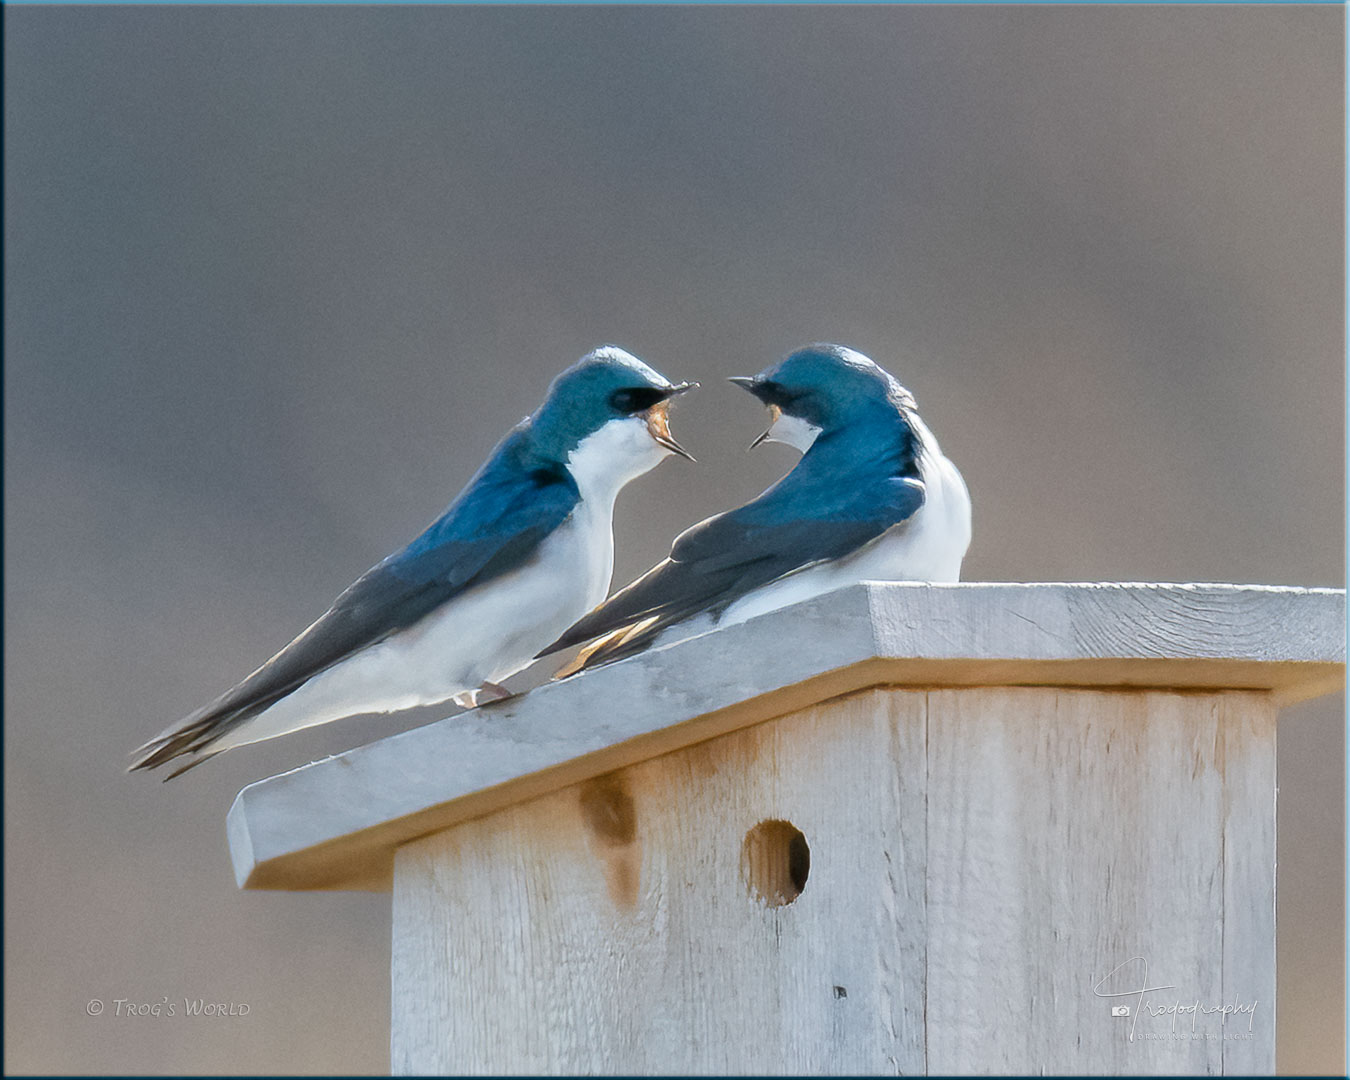 Tree Swallows in a heated argument